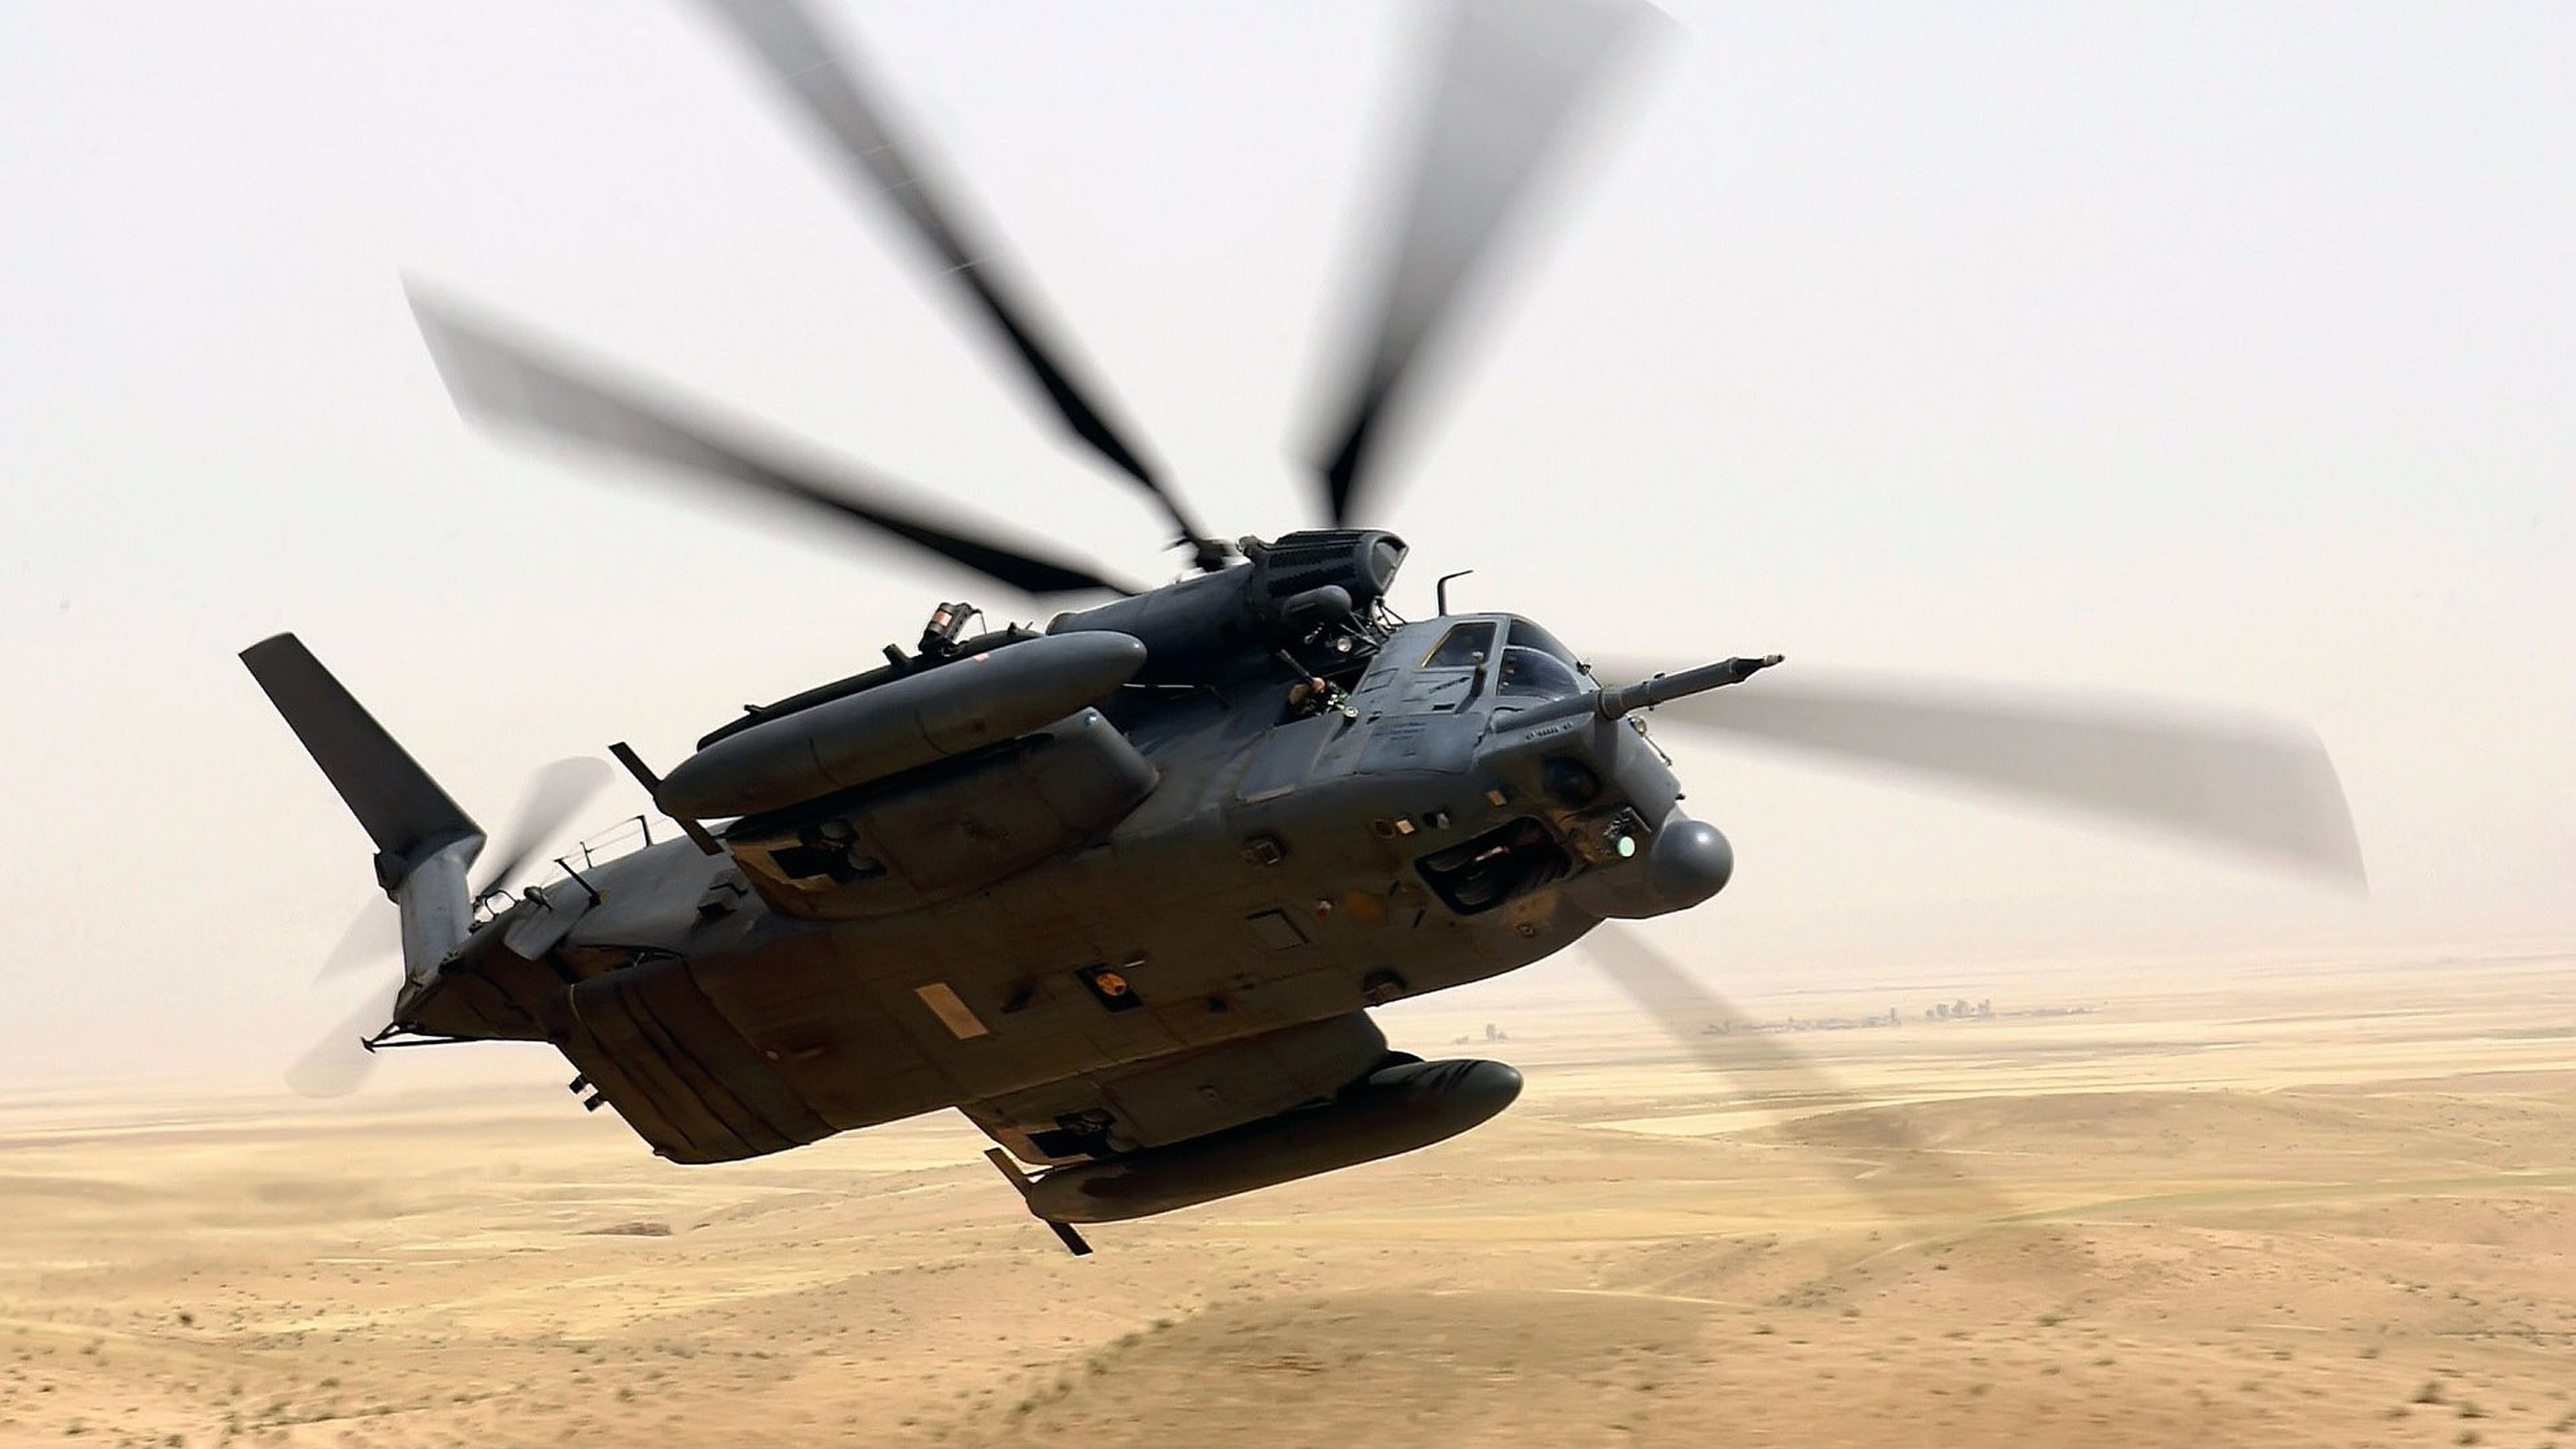 Best Sikorsky MH-53 wallpaper ID:10208 for High Resolution ultra hd 4k PC